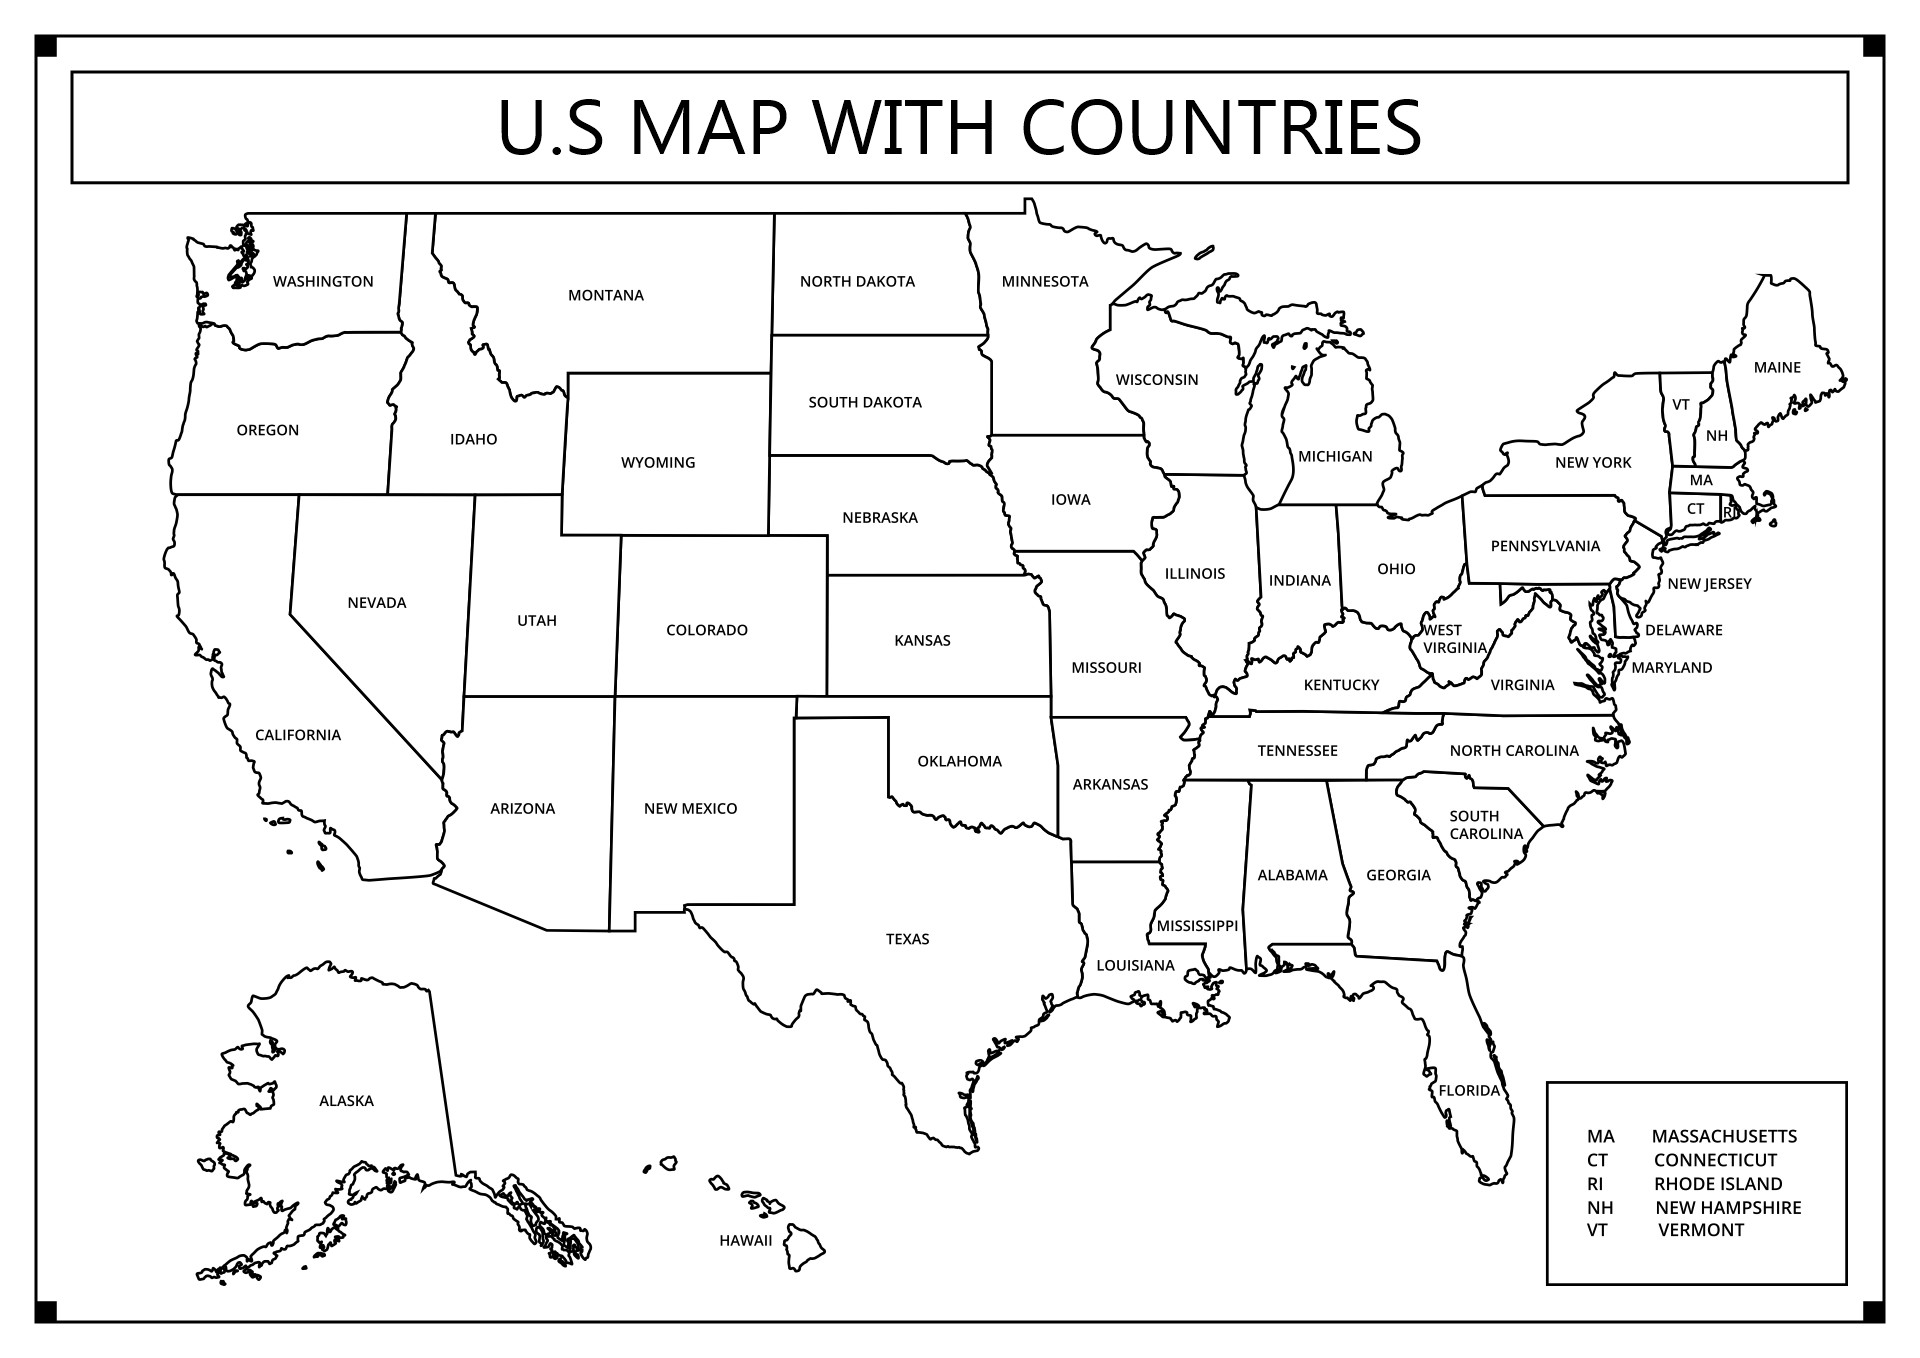 Blank US Map with States Labeled Image